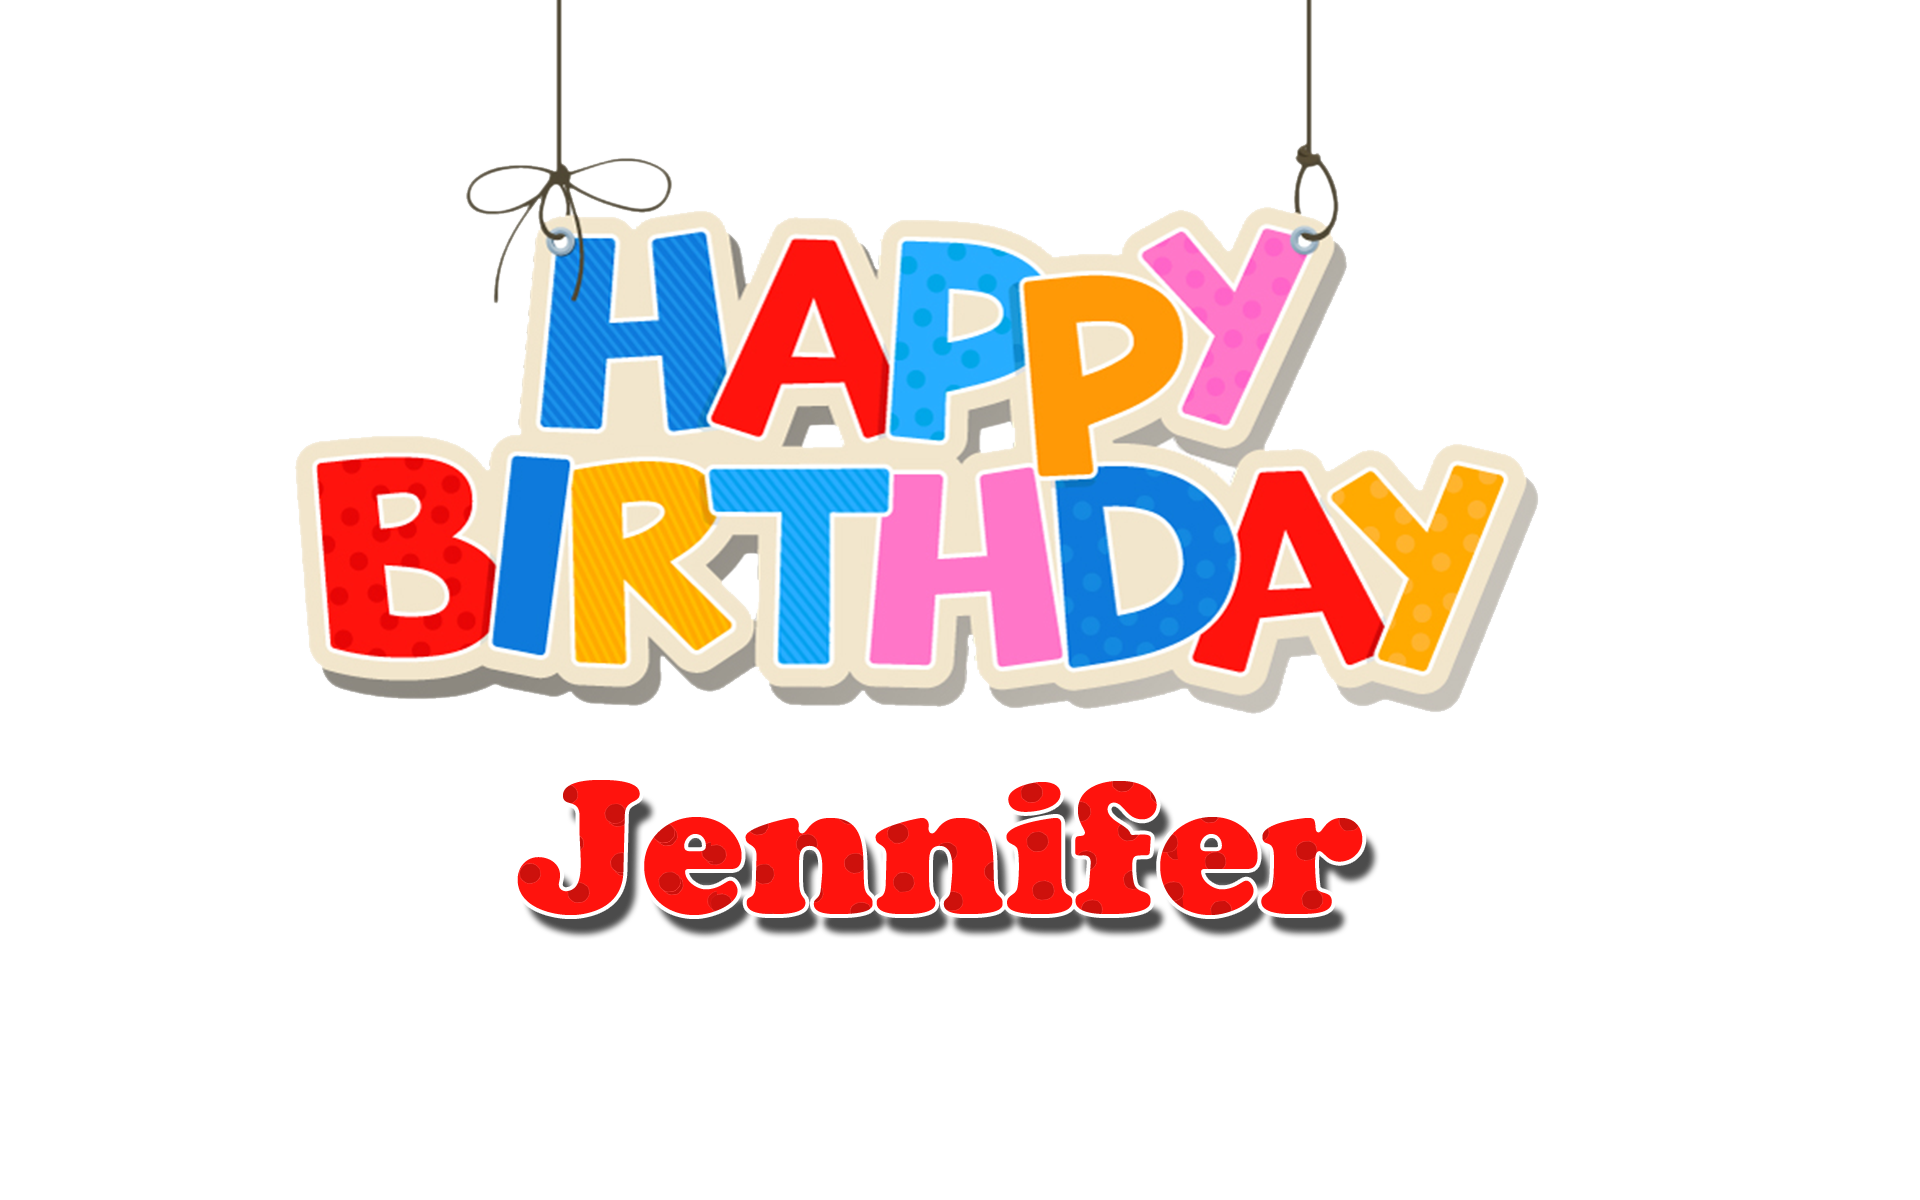 Happy birthday jennifer images clipart images gallery for